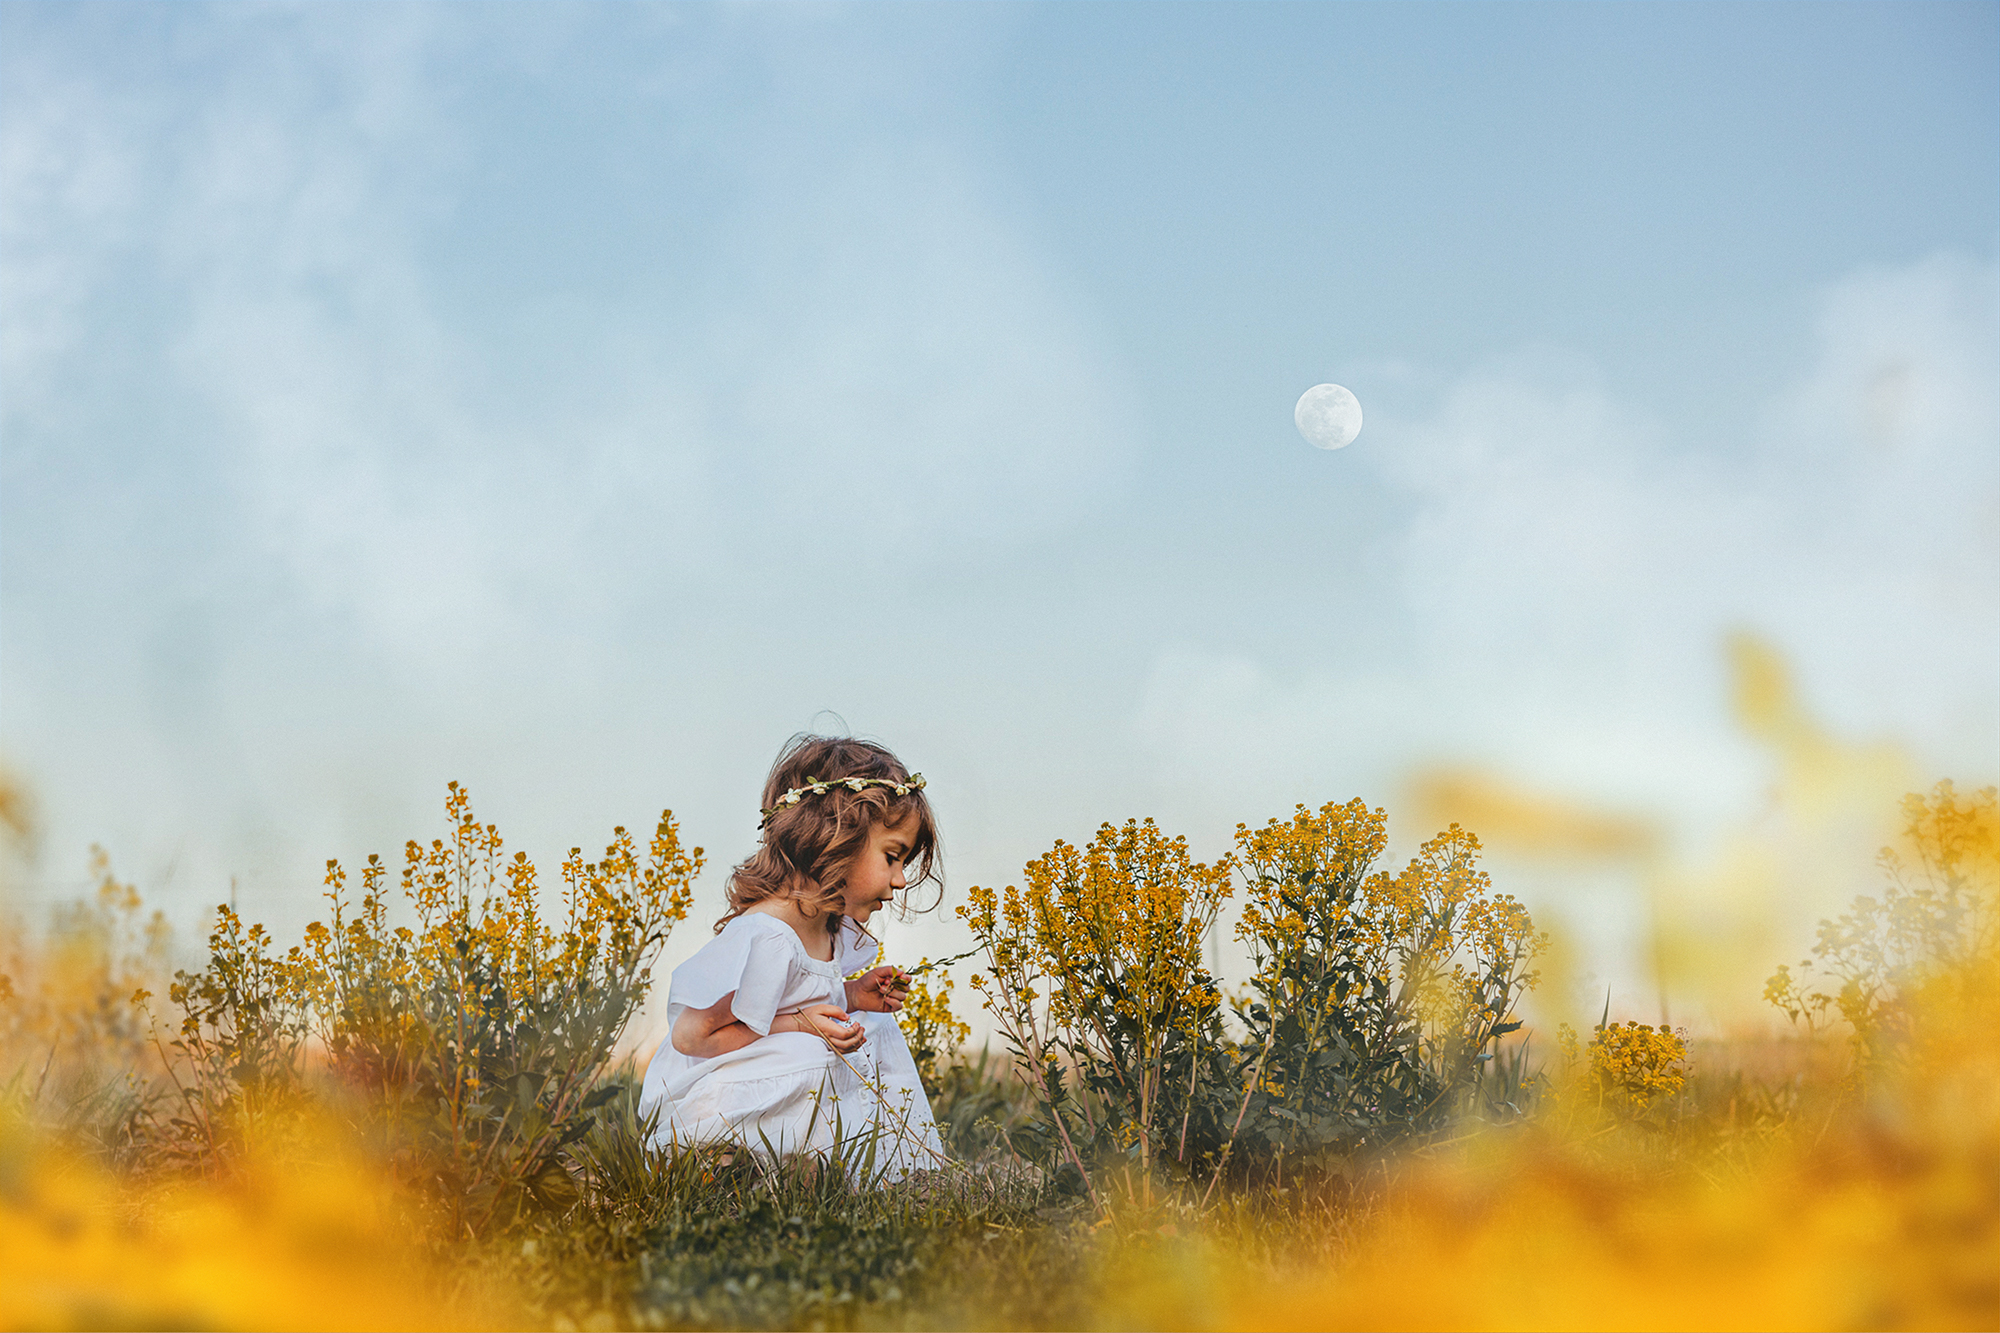 girl sitting in field of yellow flowers under a moon